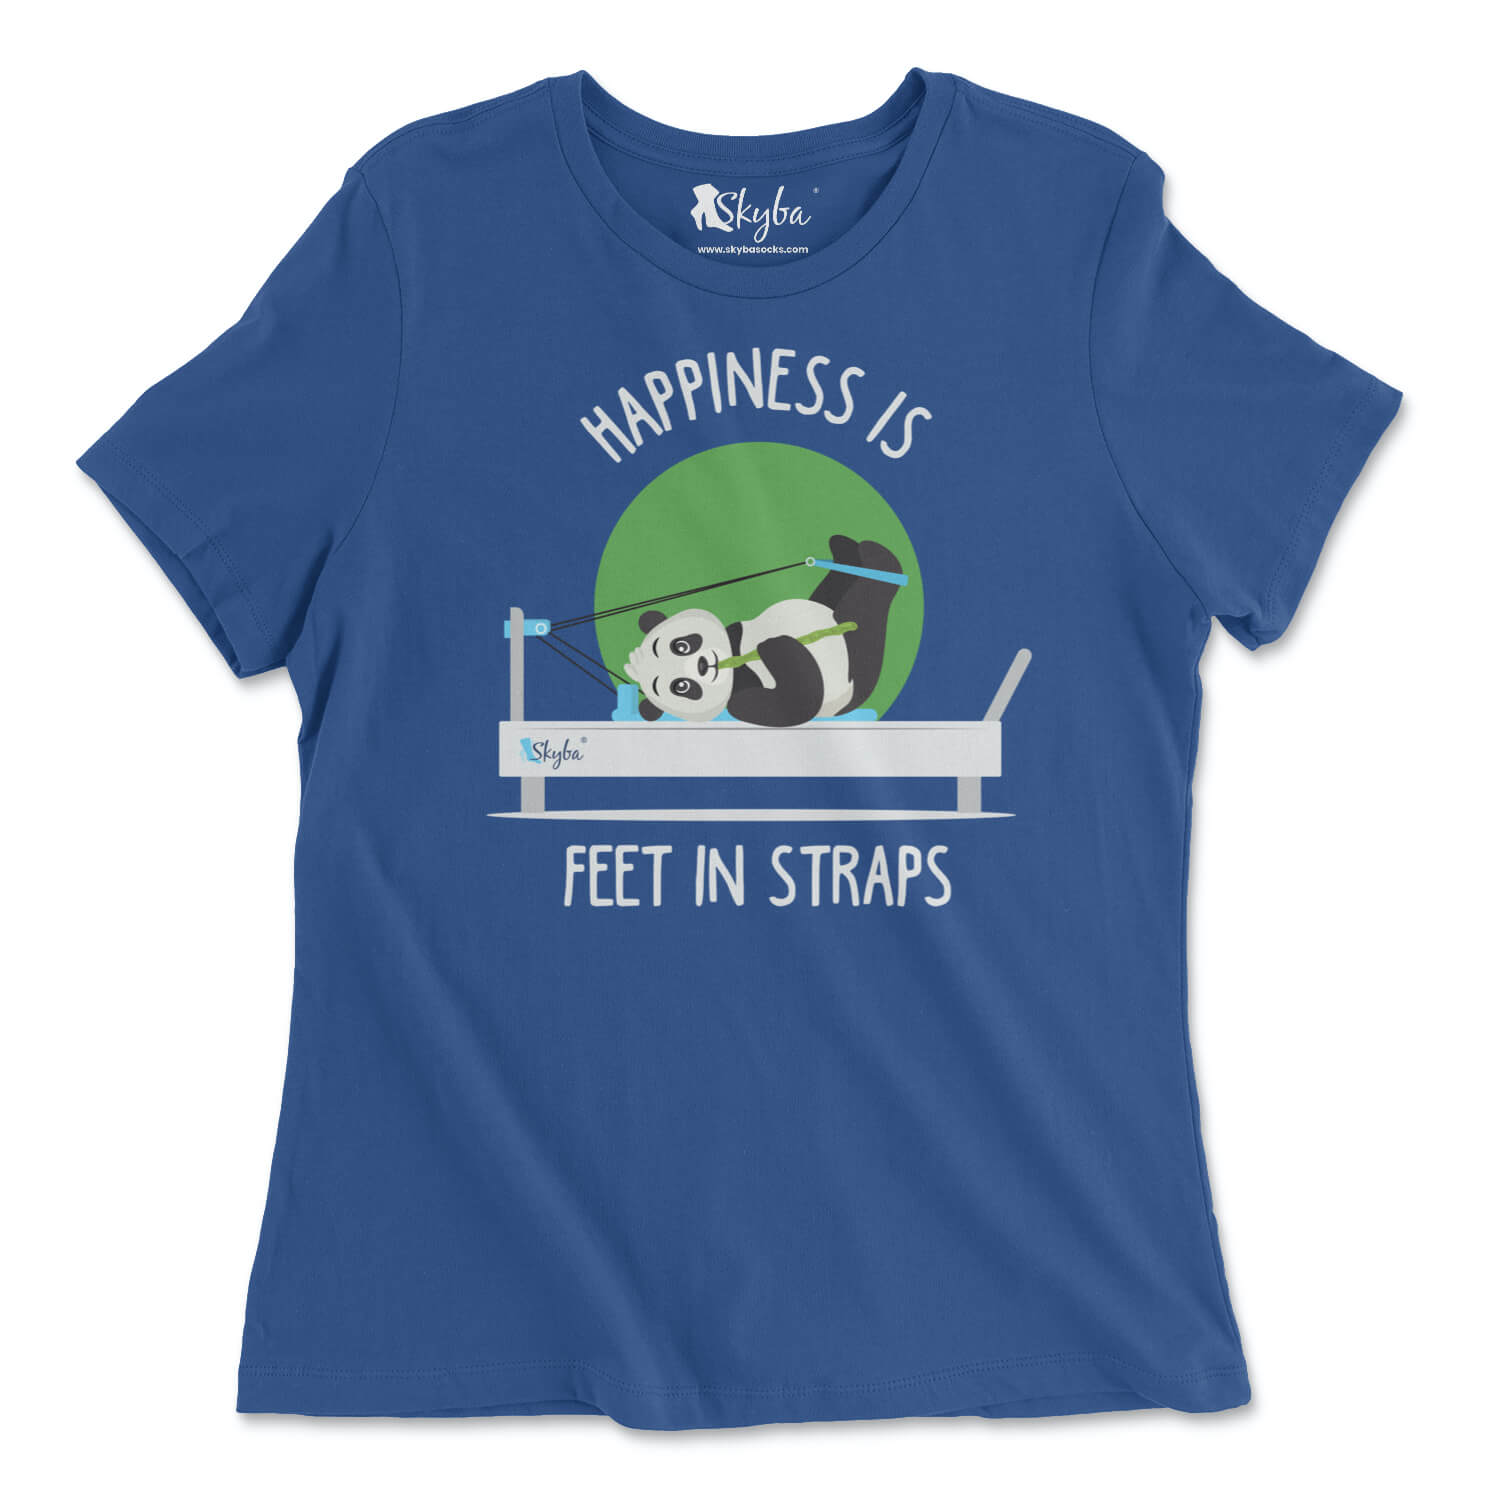 "Happiness is Feet in Straps" Panda Reformer - Classic Tee Skyba T-Shirt